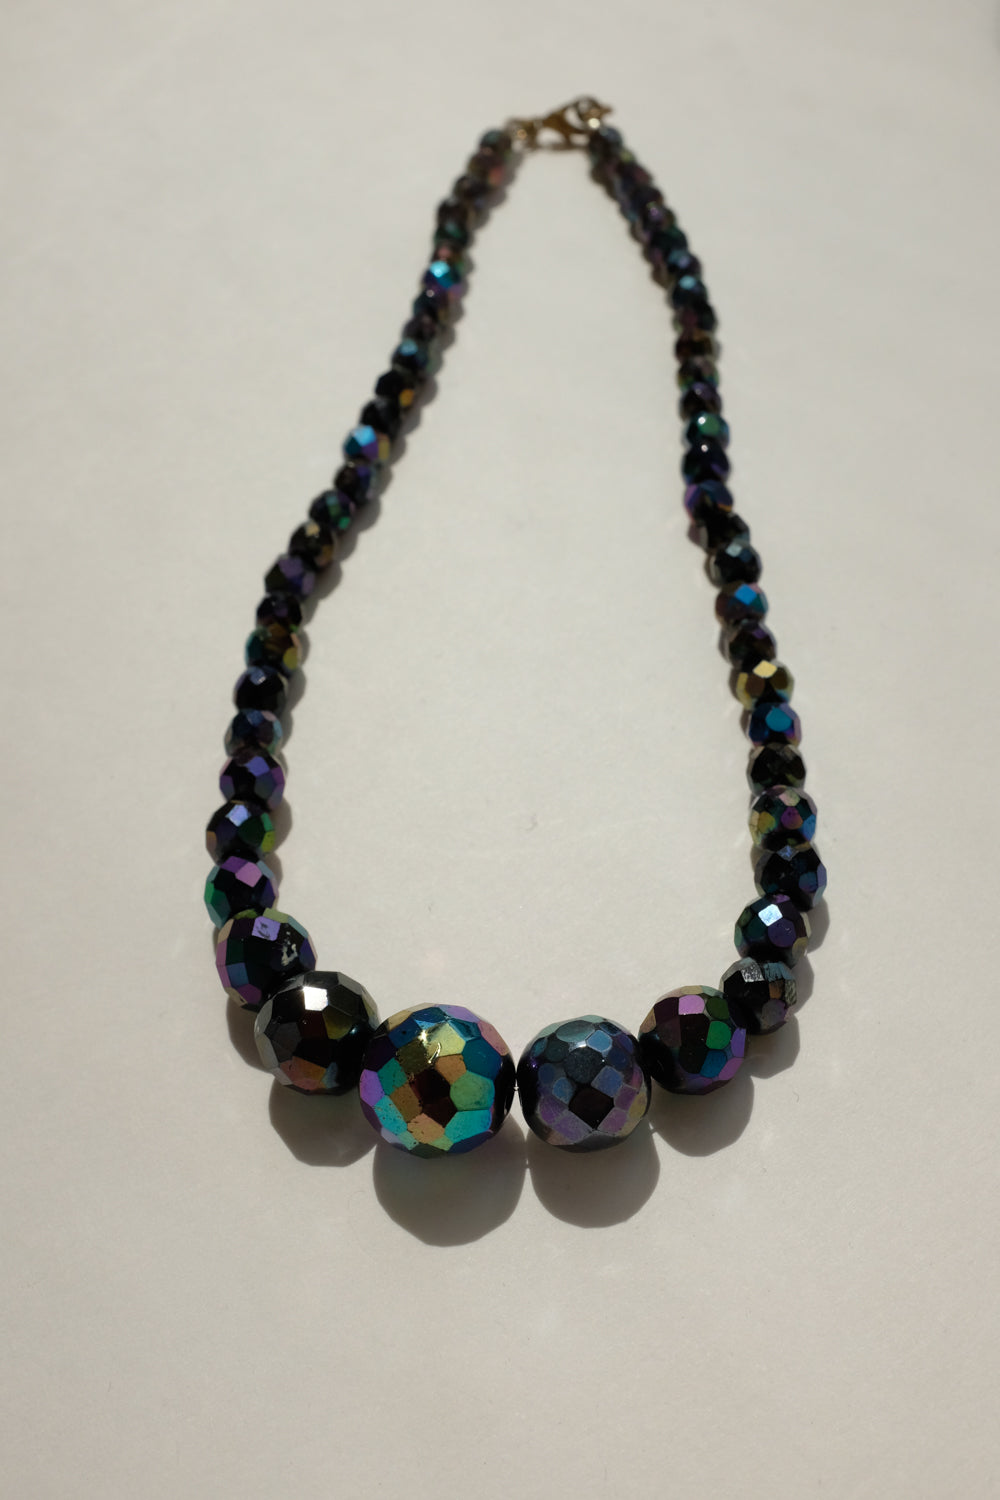 BLACK SPACE GLASS BEADS VINTAGE NECKLACE